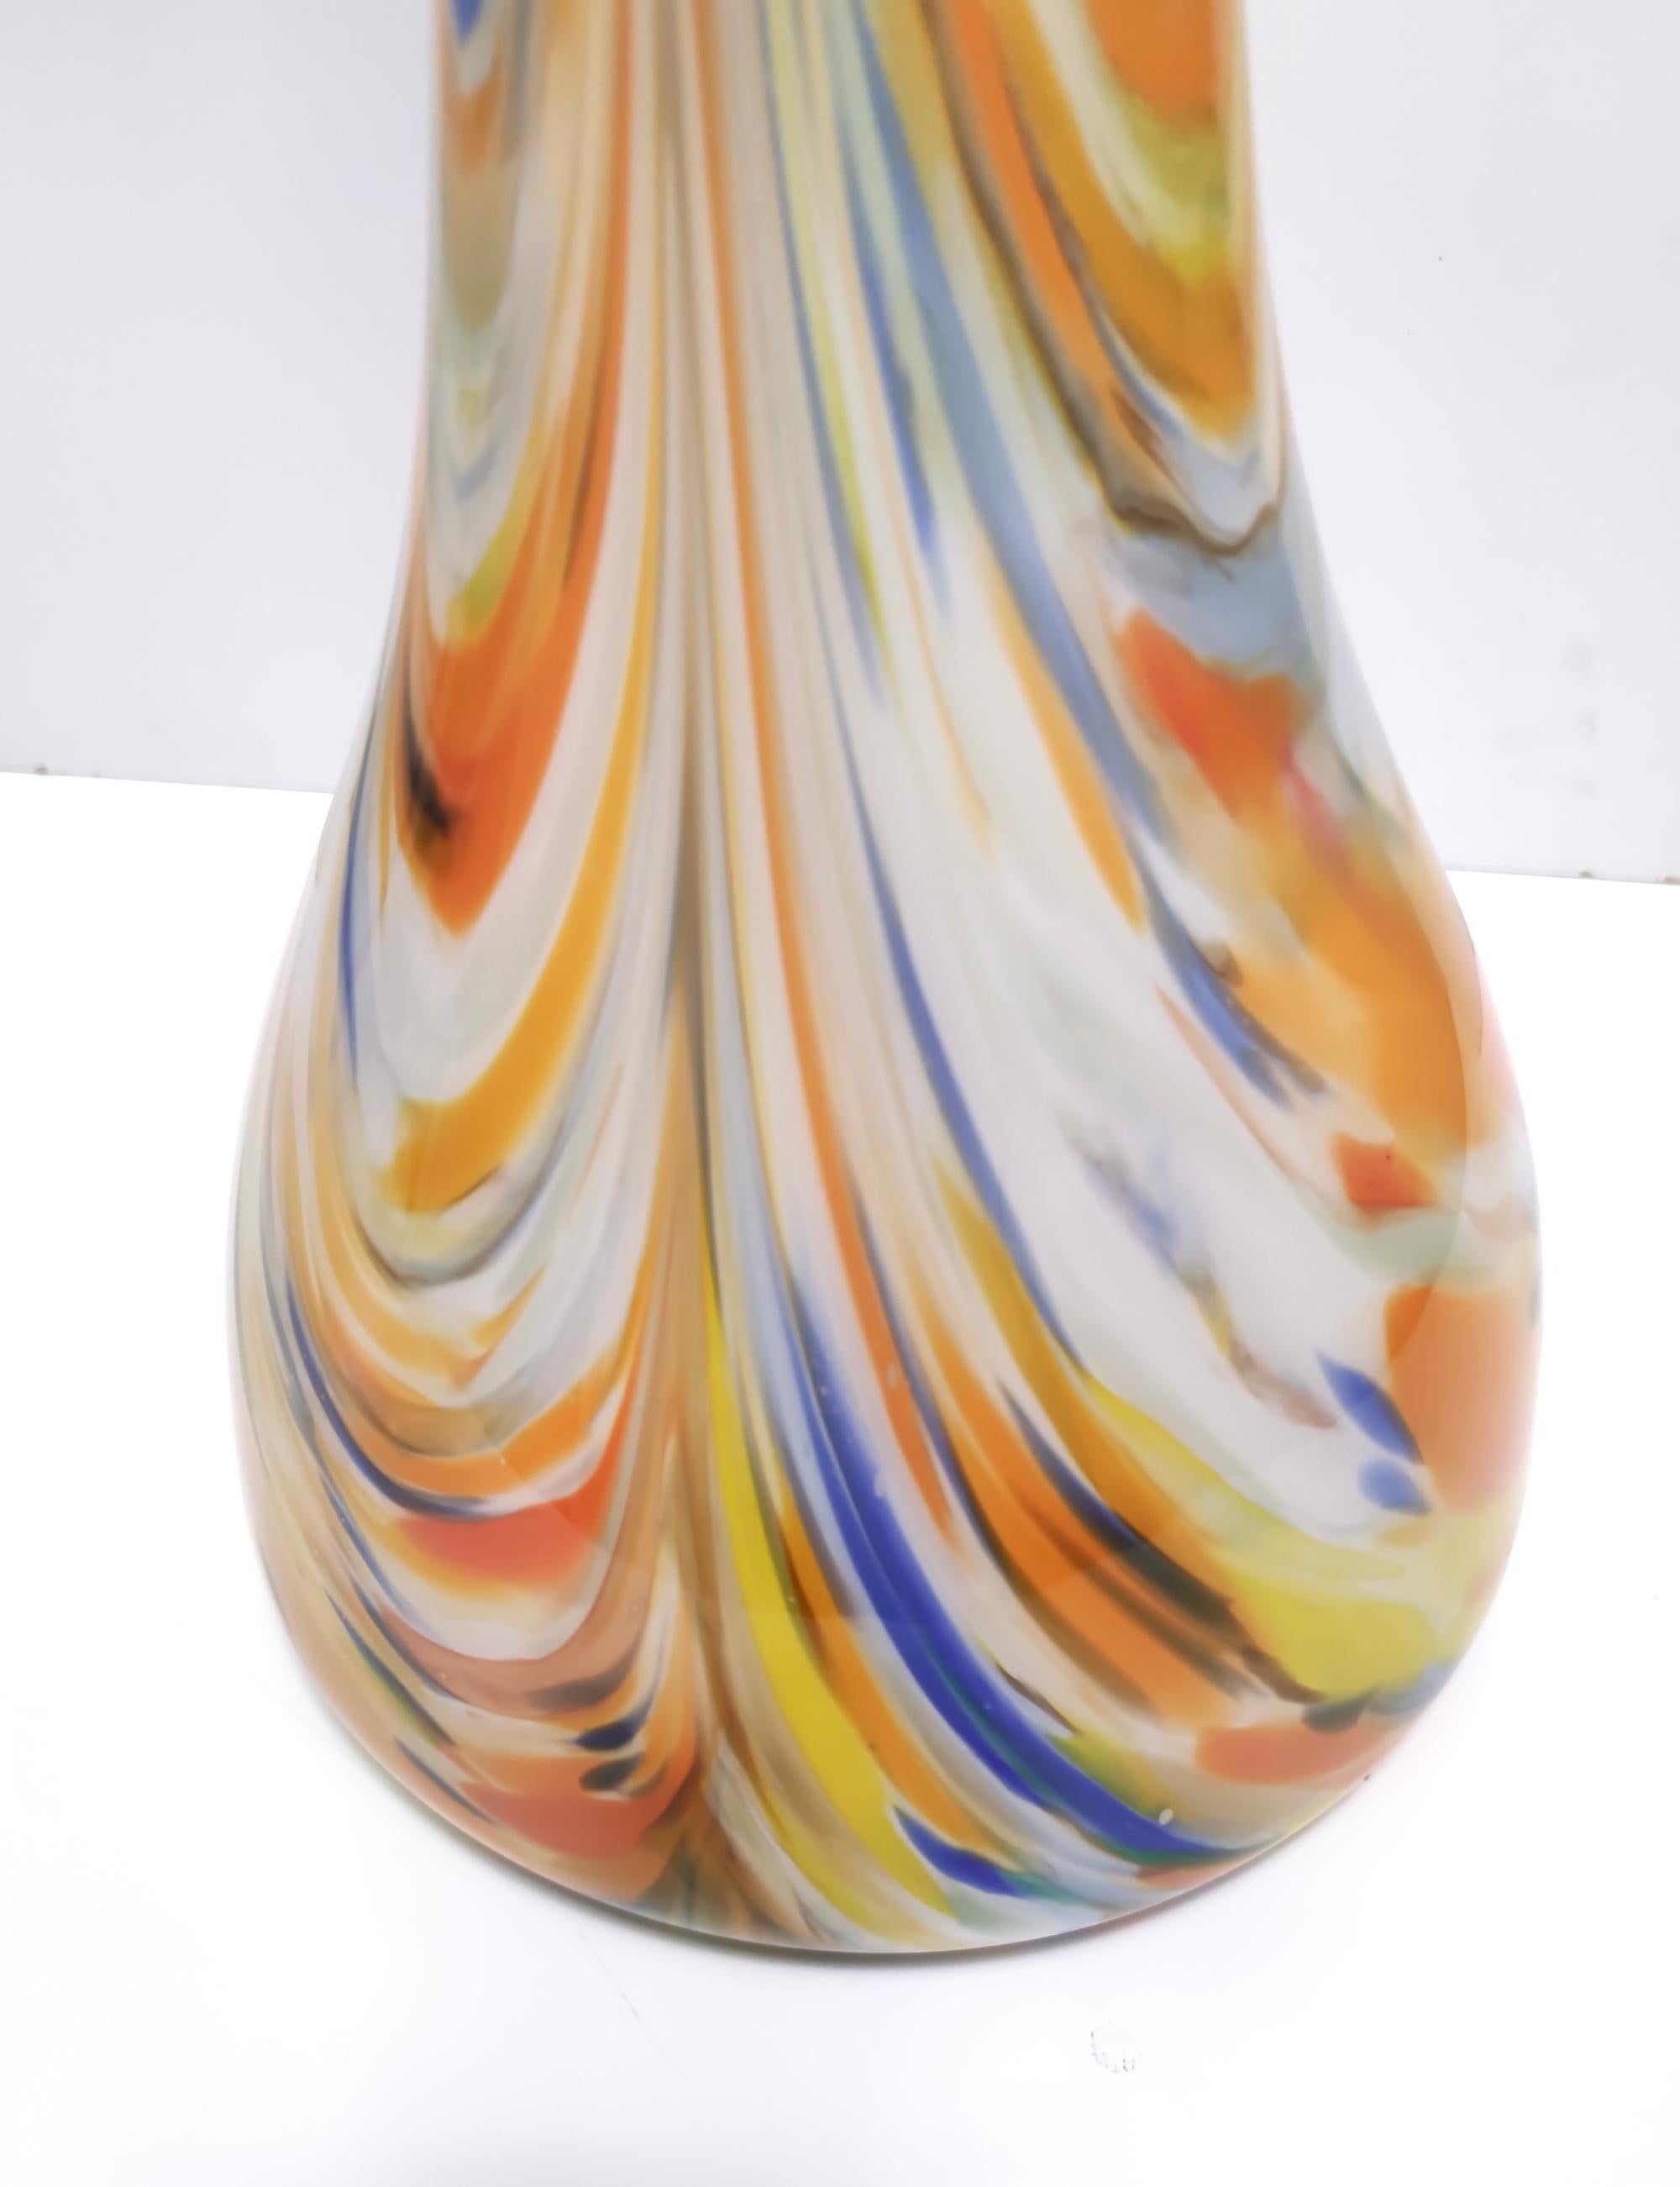 Large and Rare Vintage Orange Fenicio Glass Vase attr. to Fratelli Toso, Italy For Sale 5